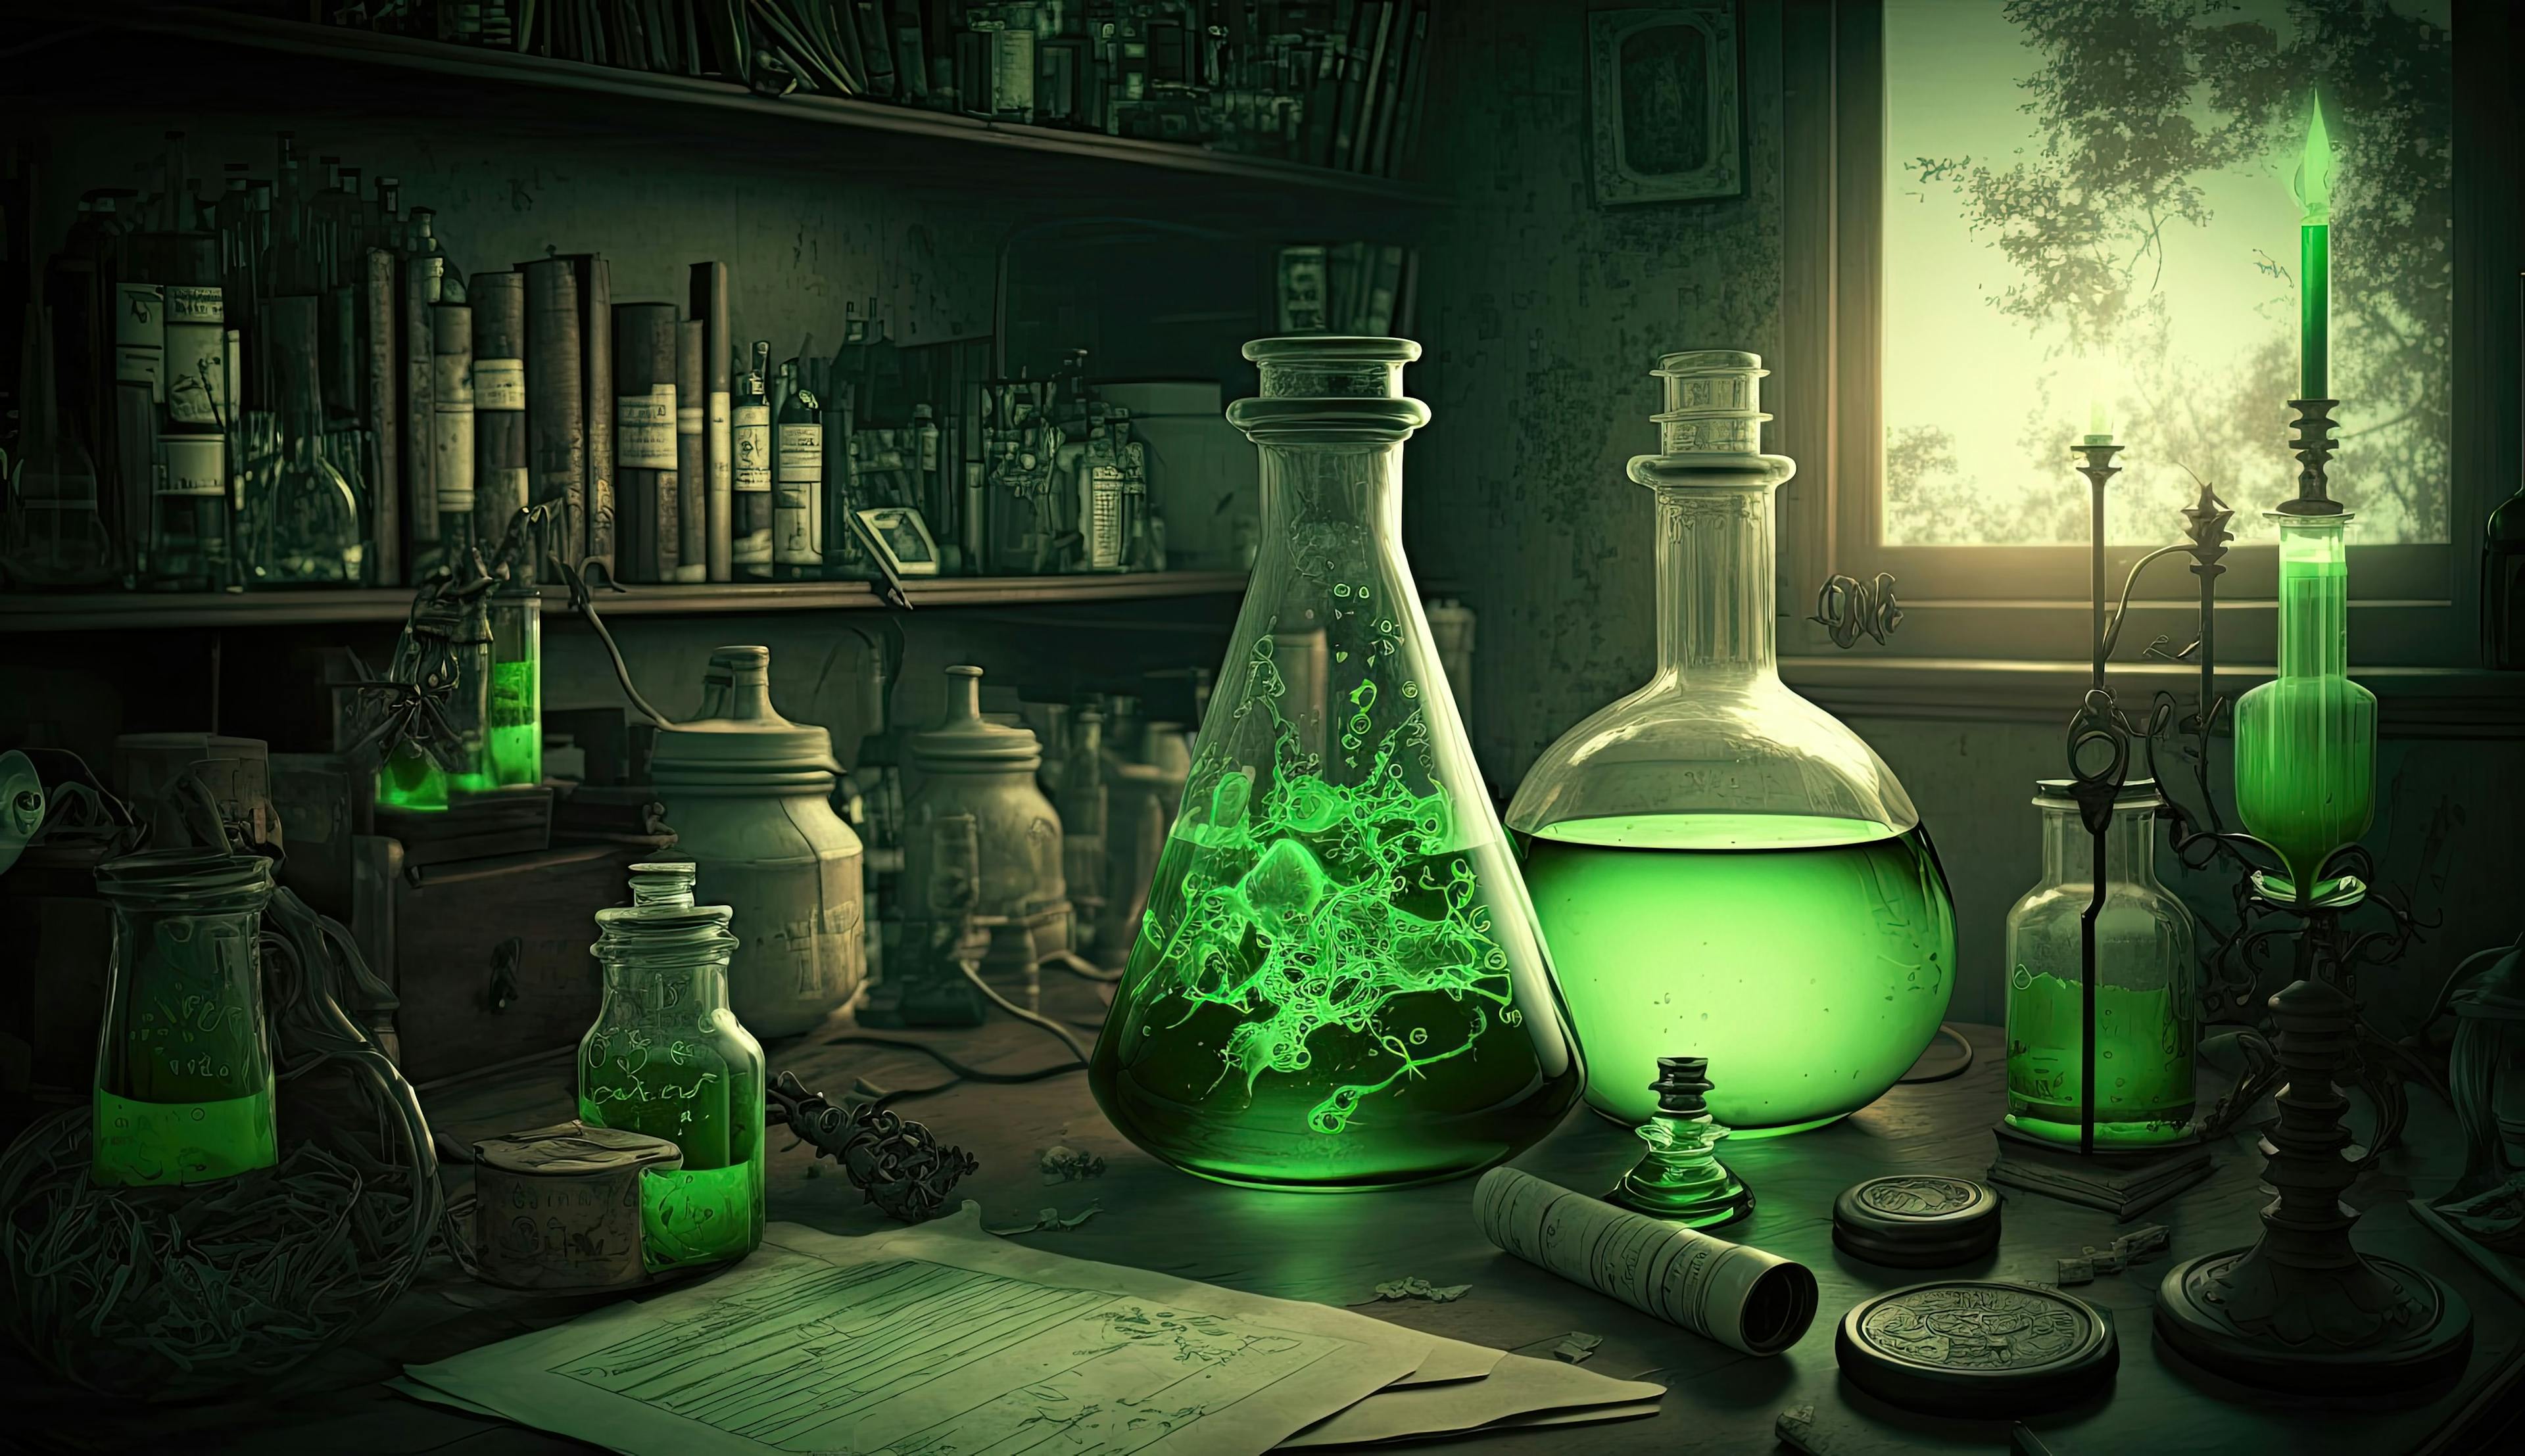 A modern green chemistry laboratory setting promotes sustainable and eco-friendly practices. Generated by AI. | Image Credit: © Anastasia - stock.adobe.com